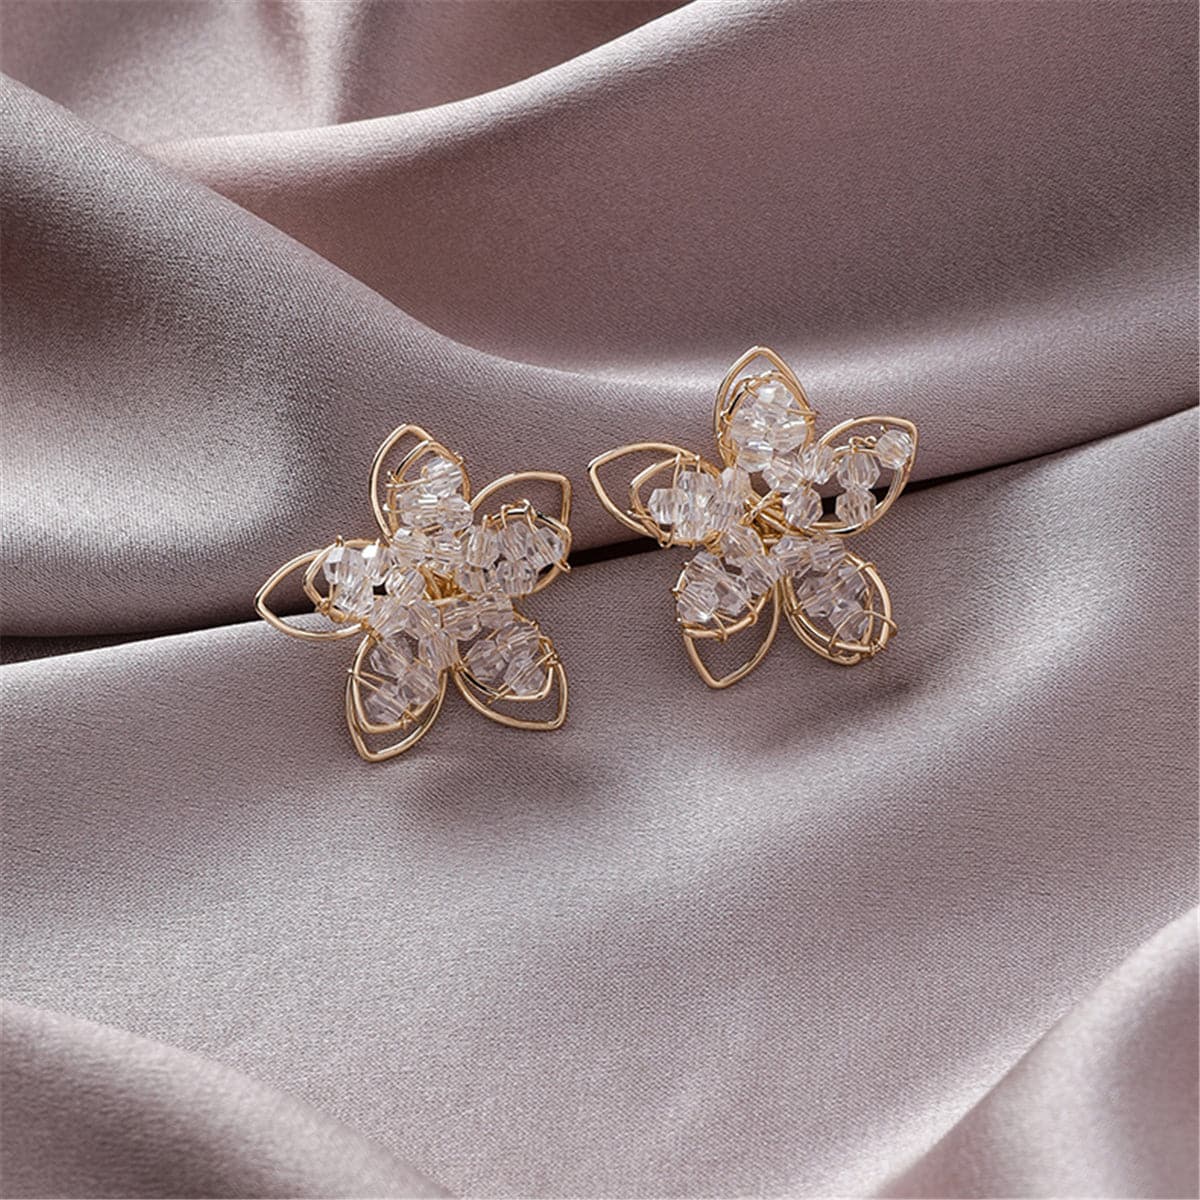 18K Gold-Plated Beaded Floral Stud Earrings